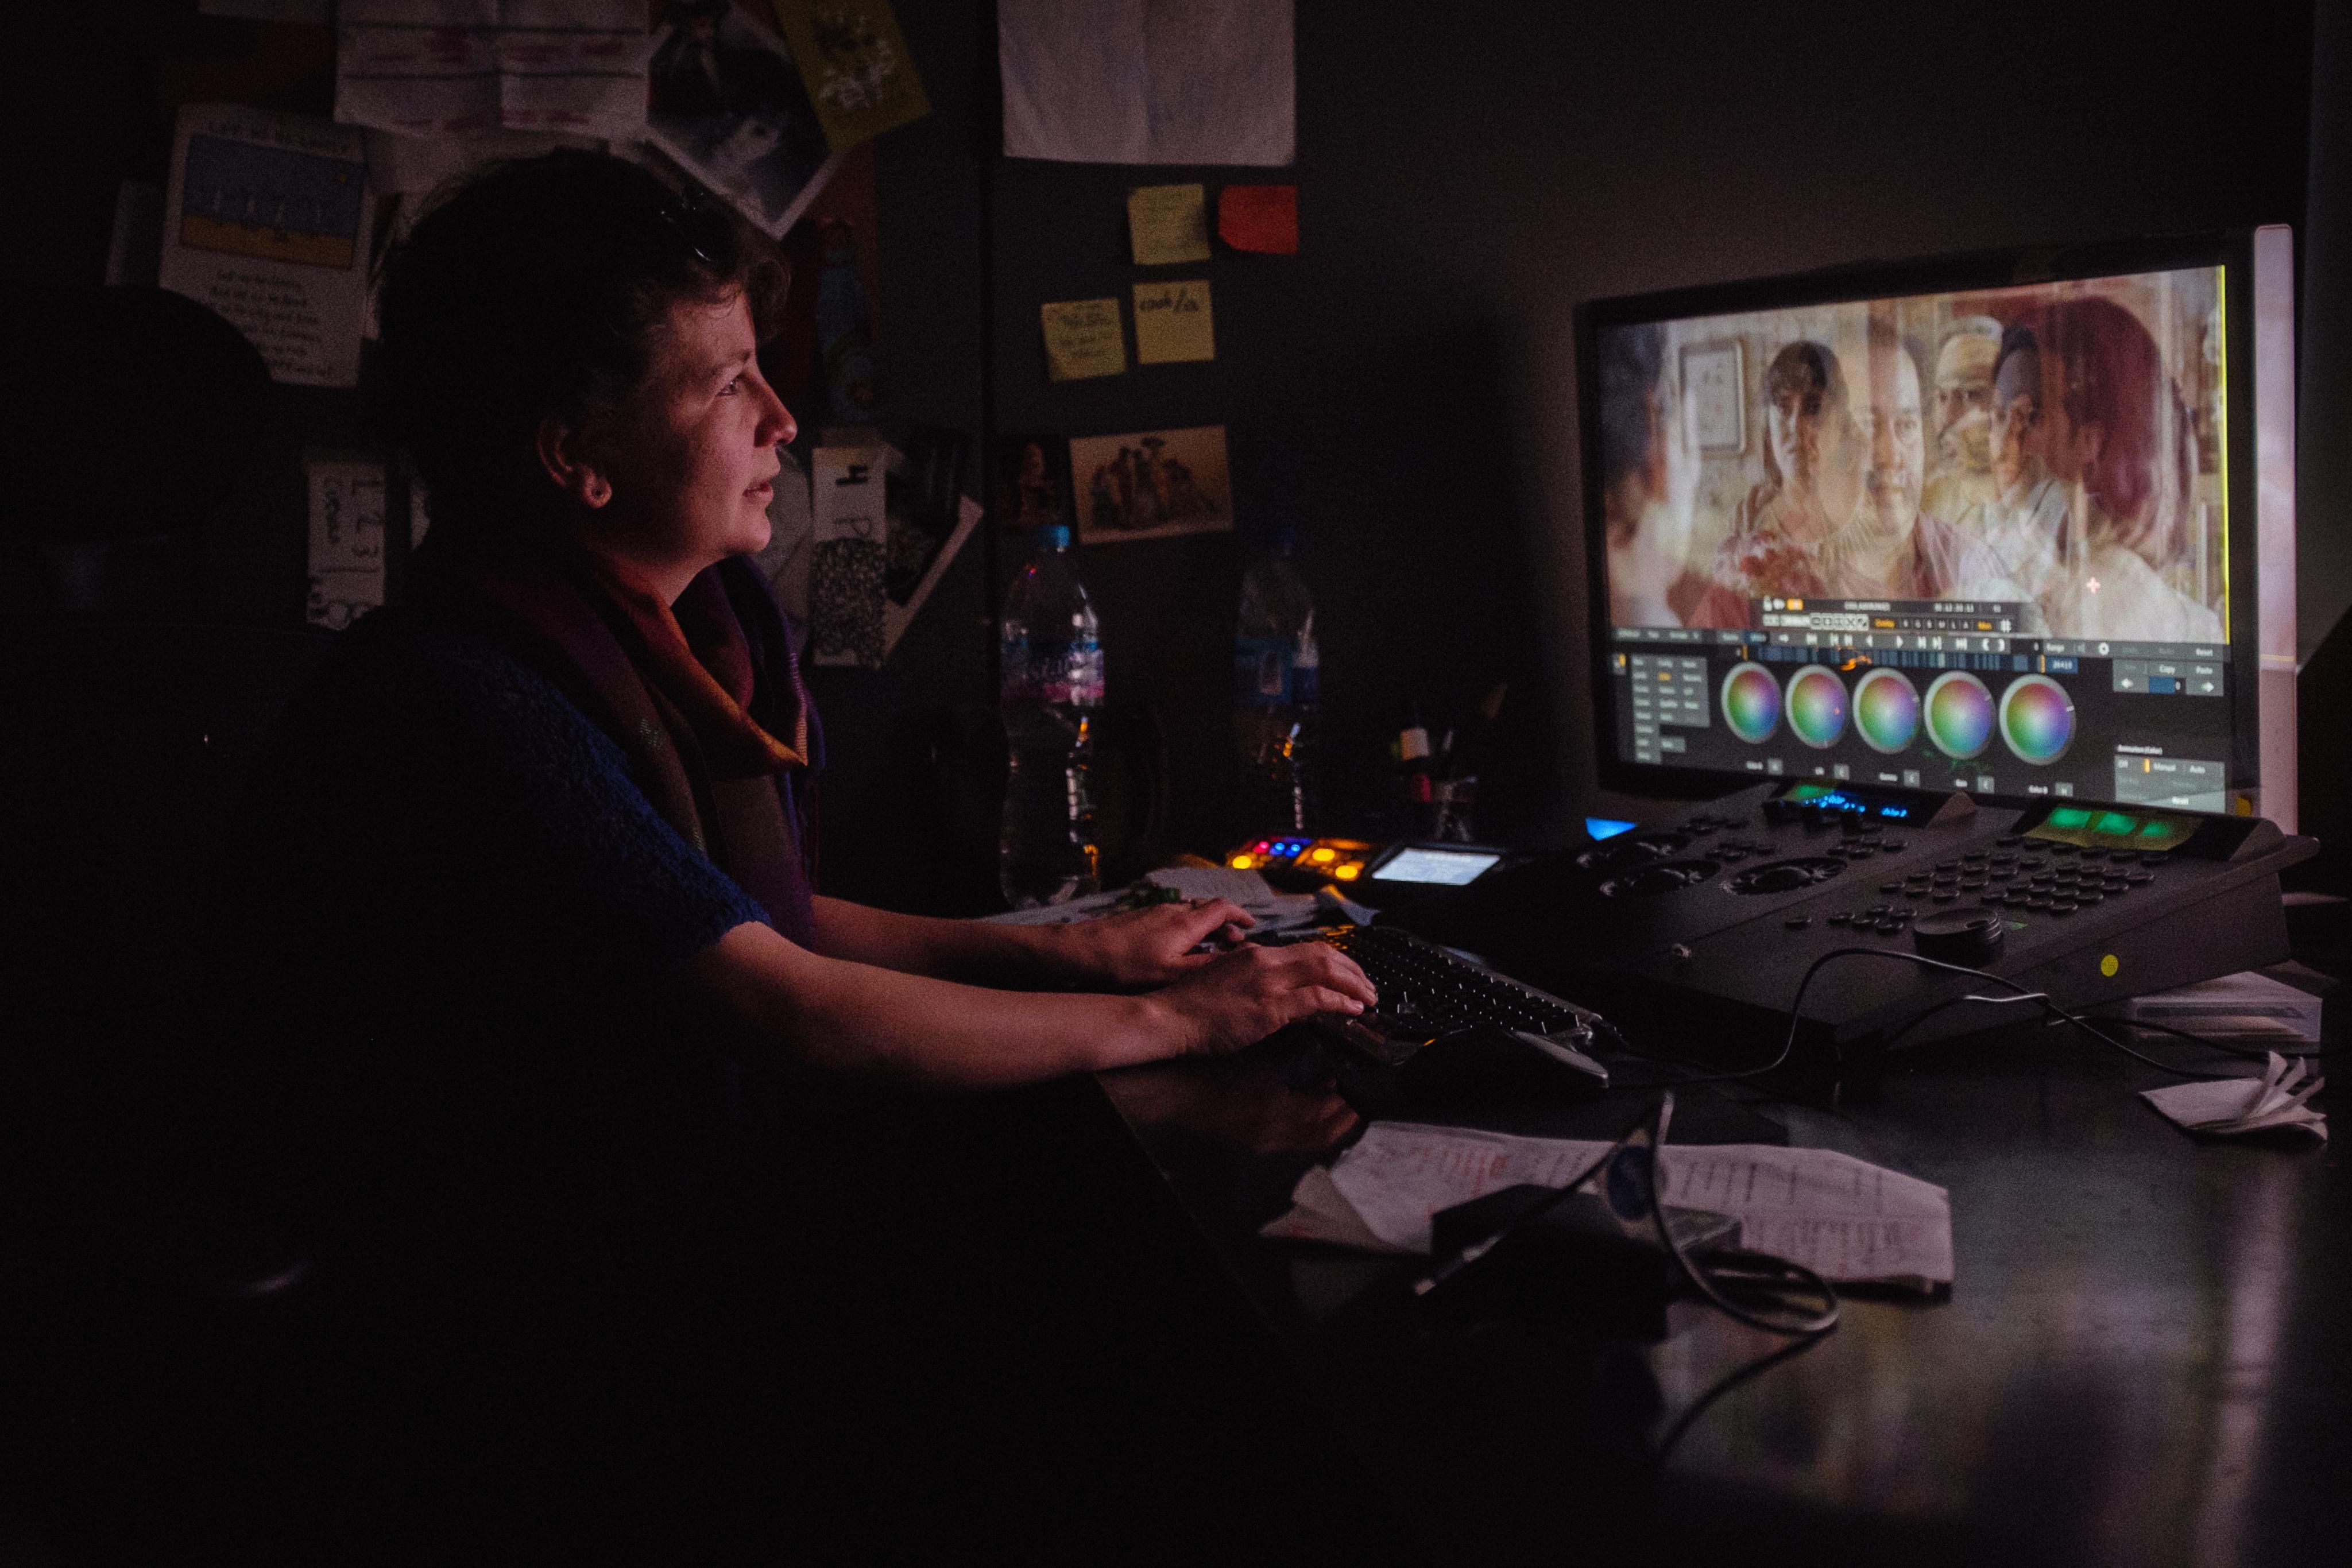 A woman color grading some footage.